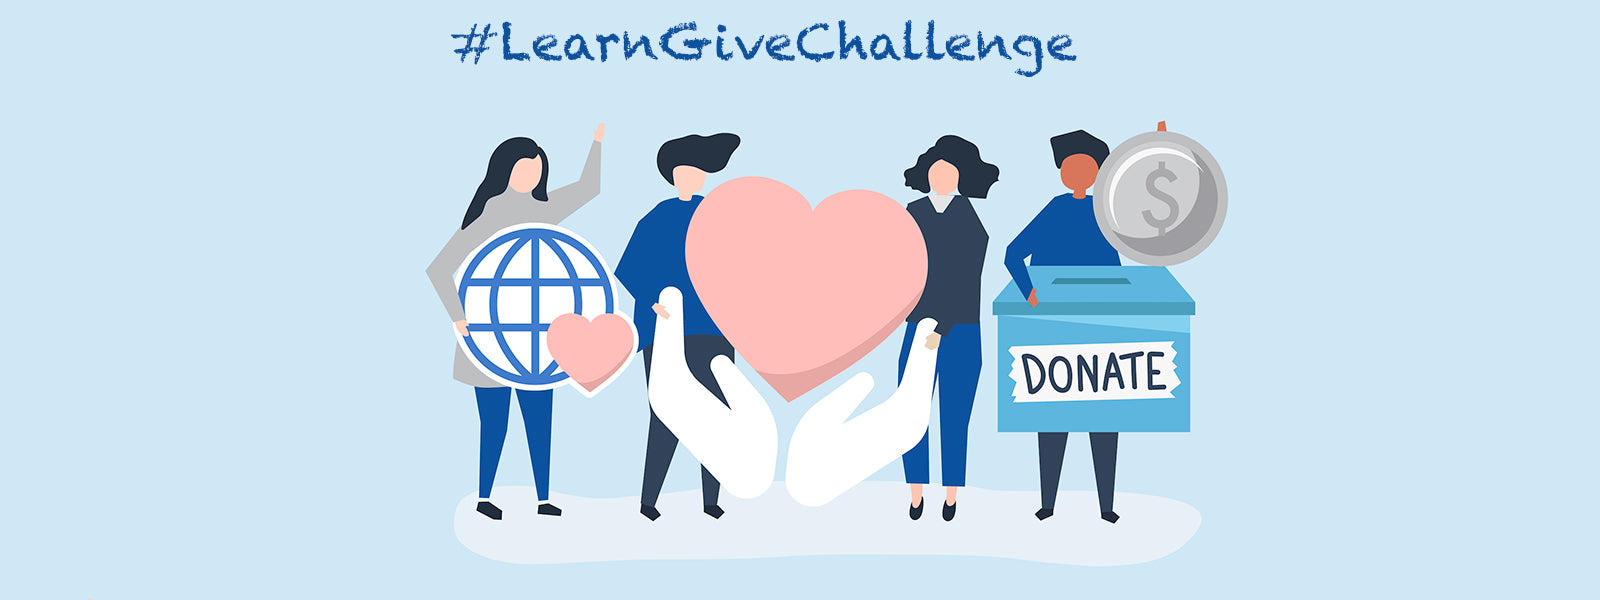 Take the #LearnGiveChallenge